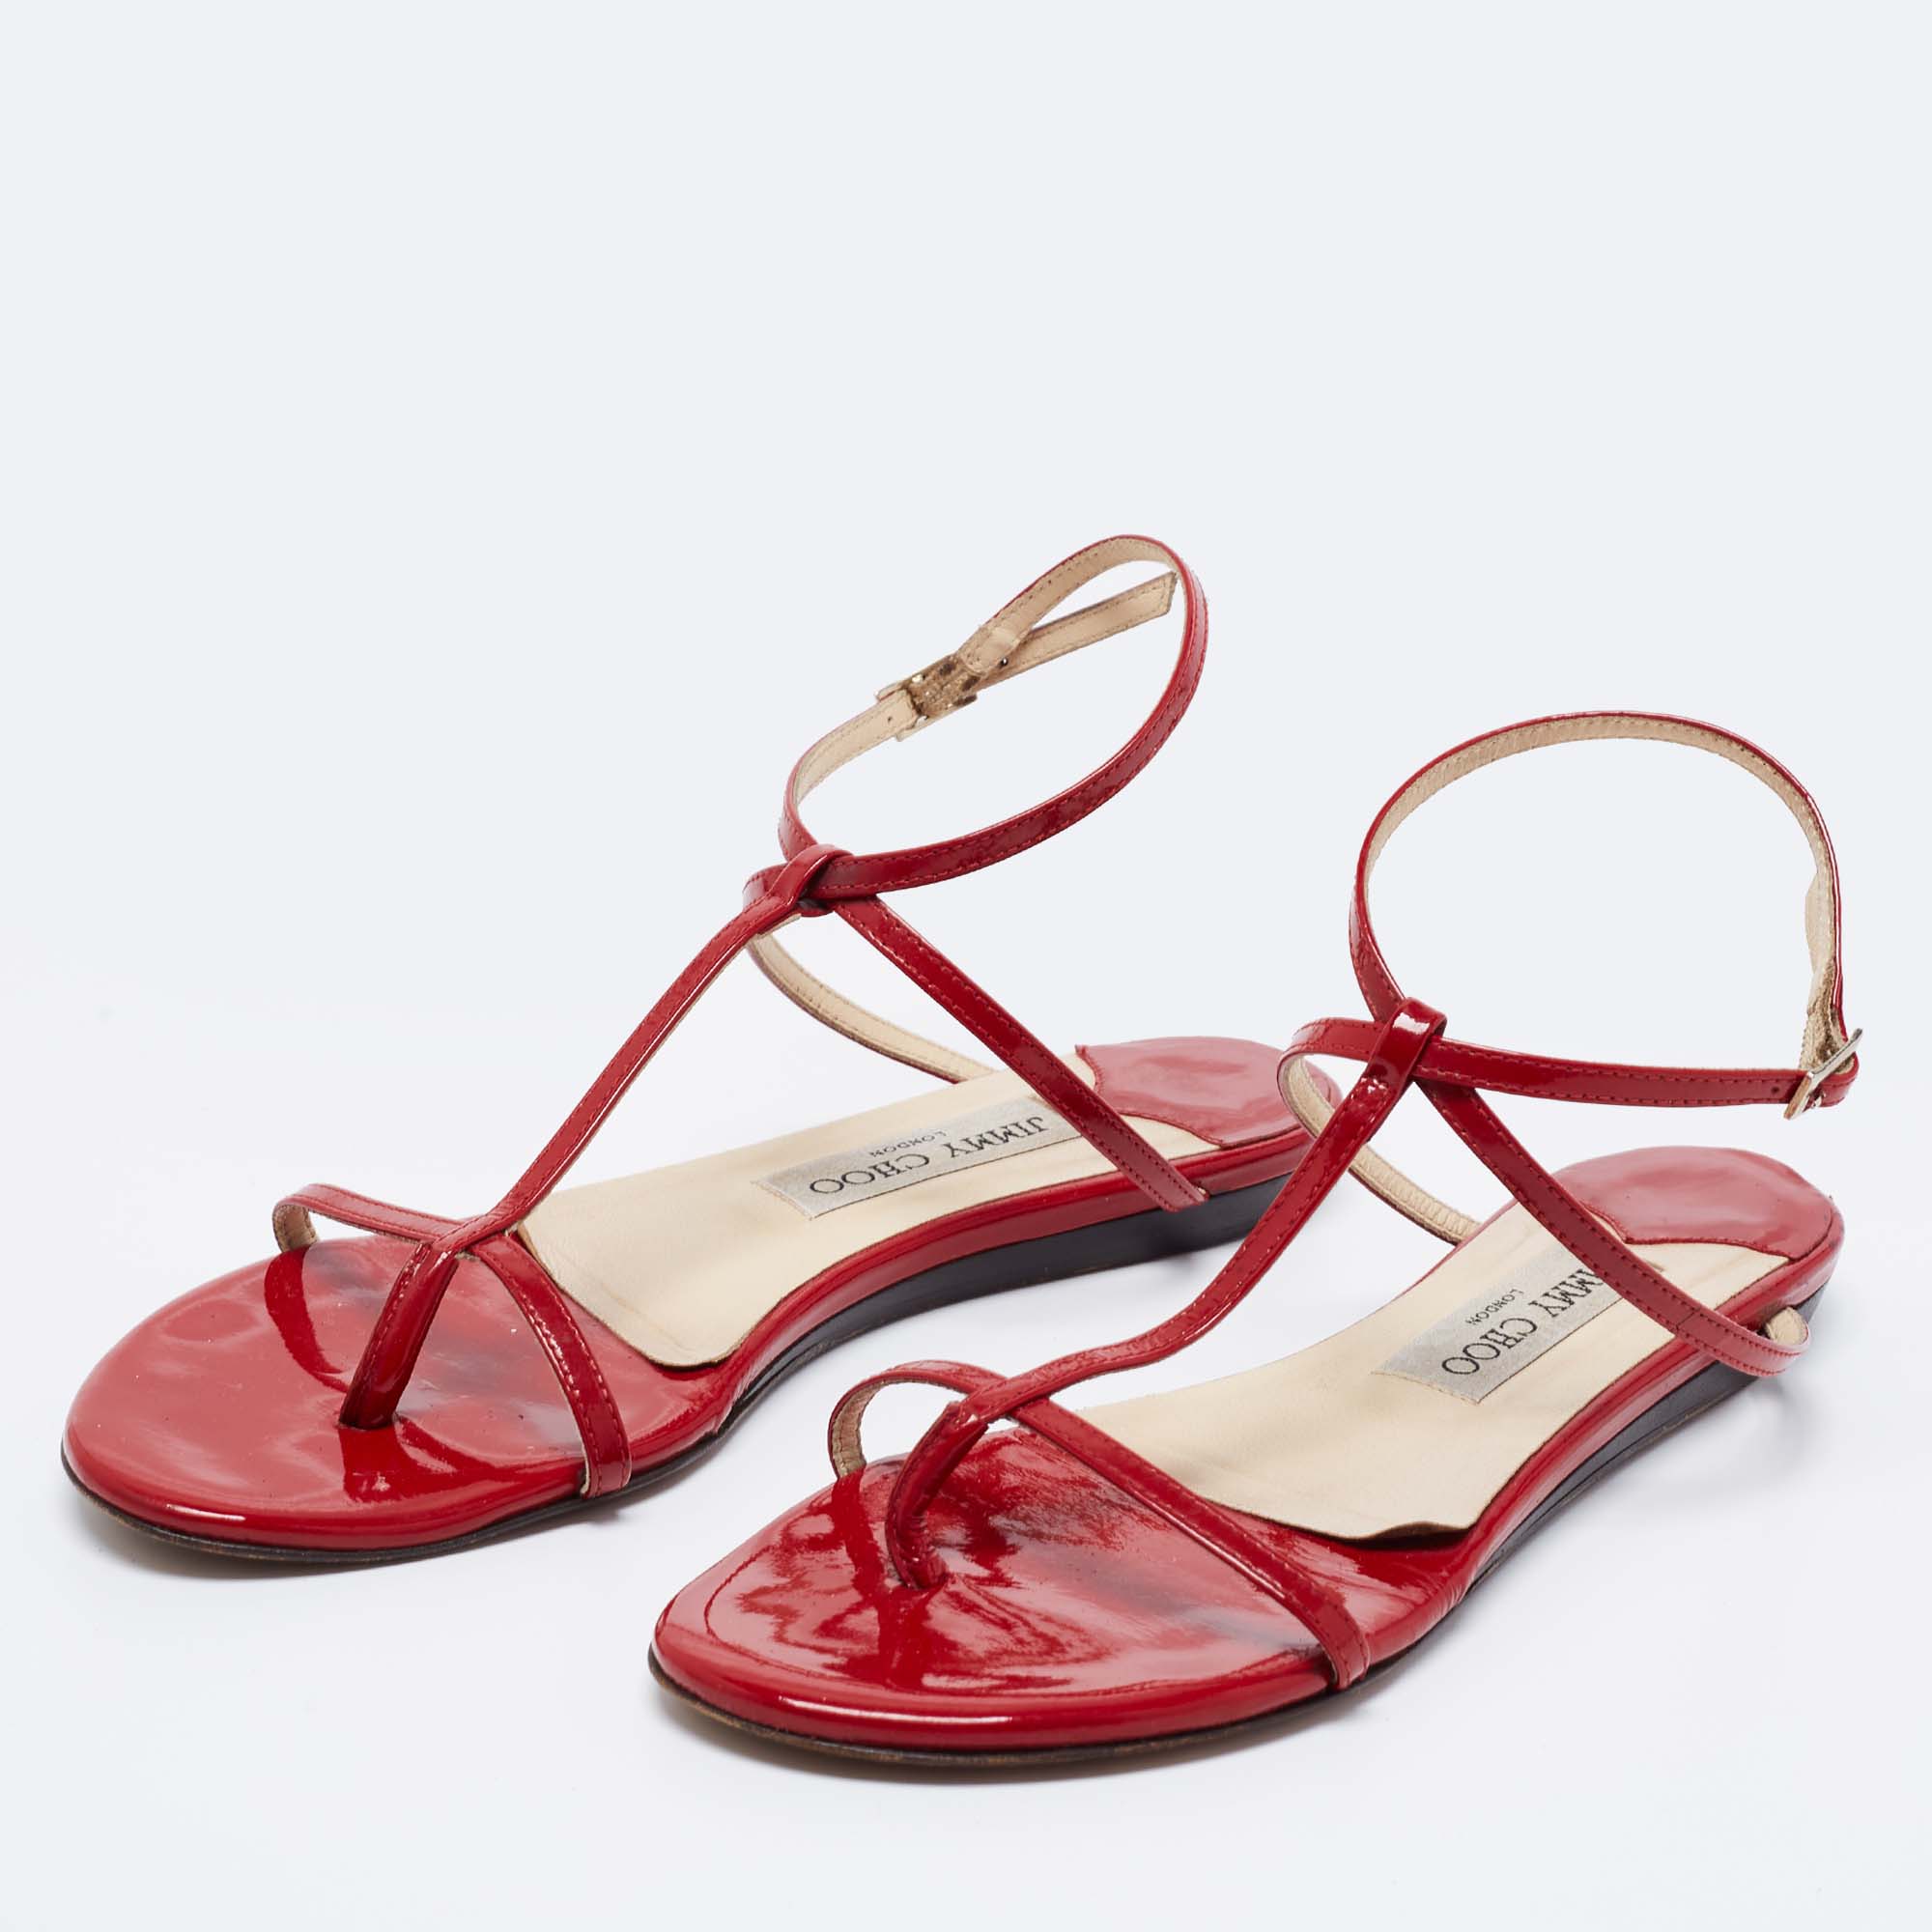 

Jimmy Choo Red Patent Leather Fiona T Strap Flat Sandals Size